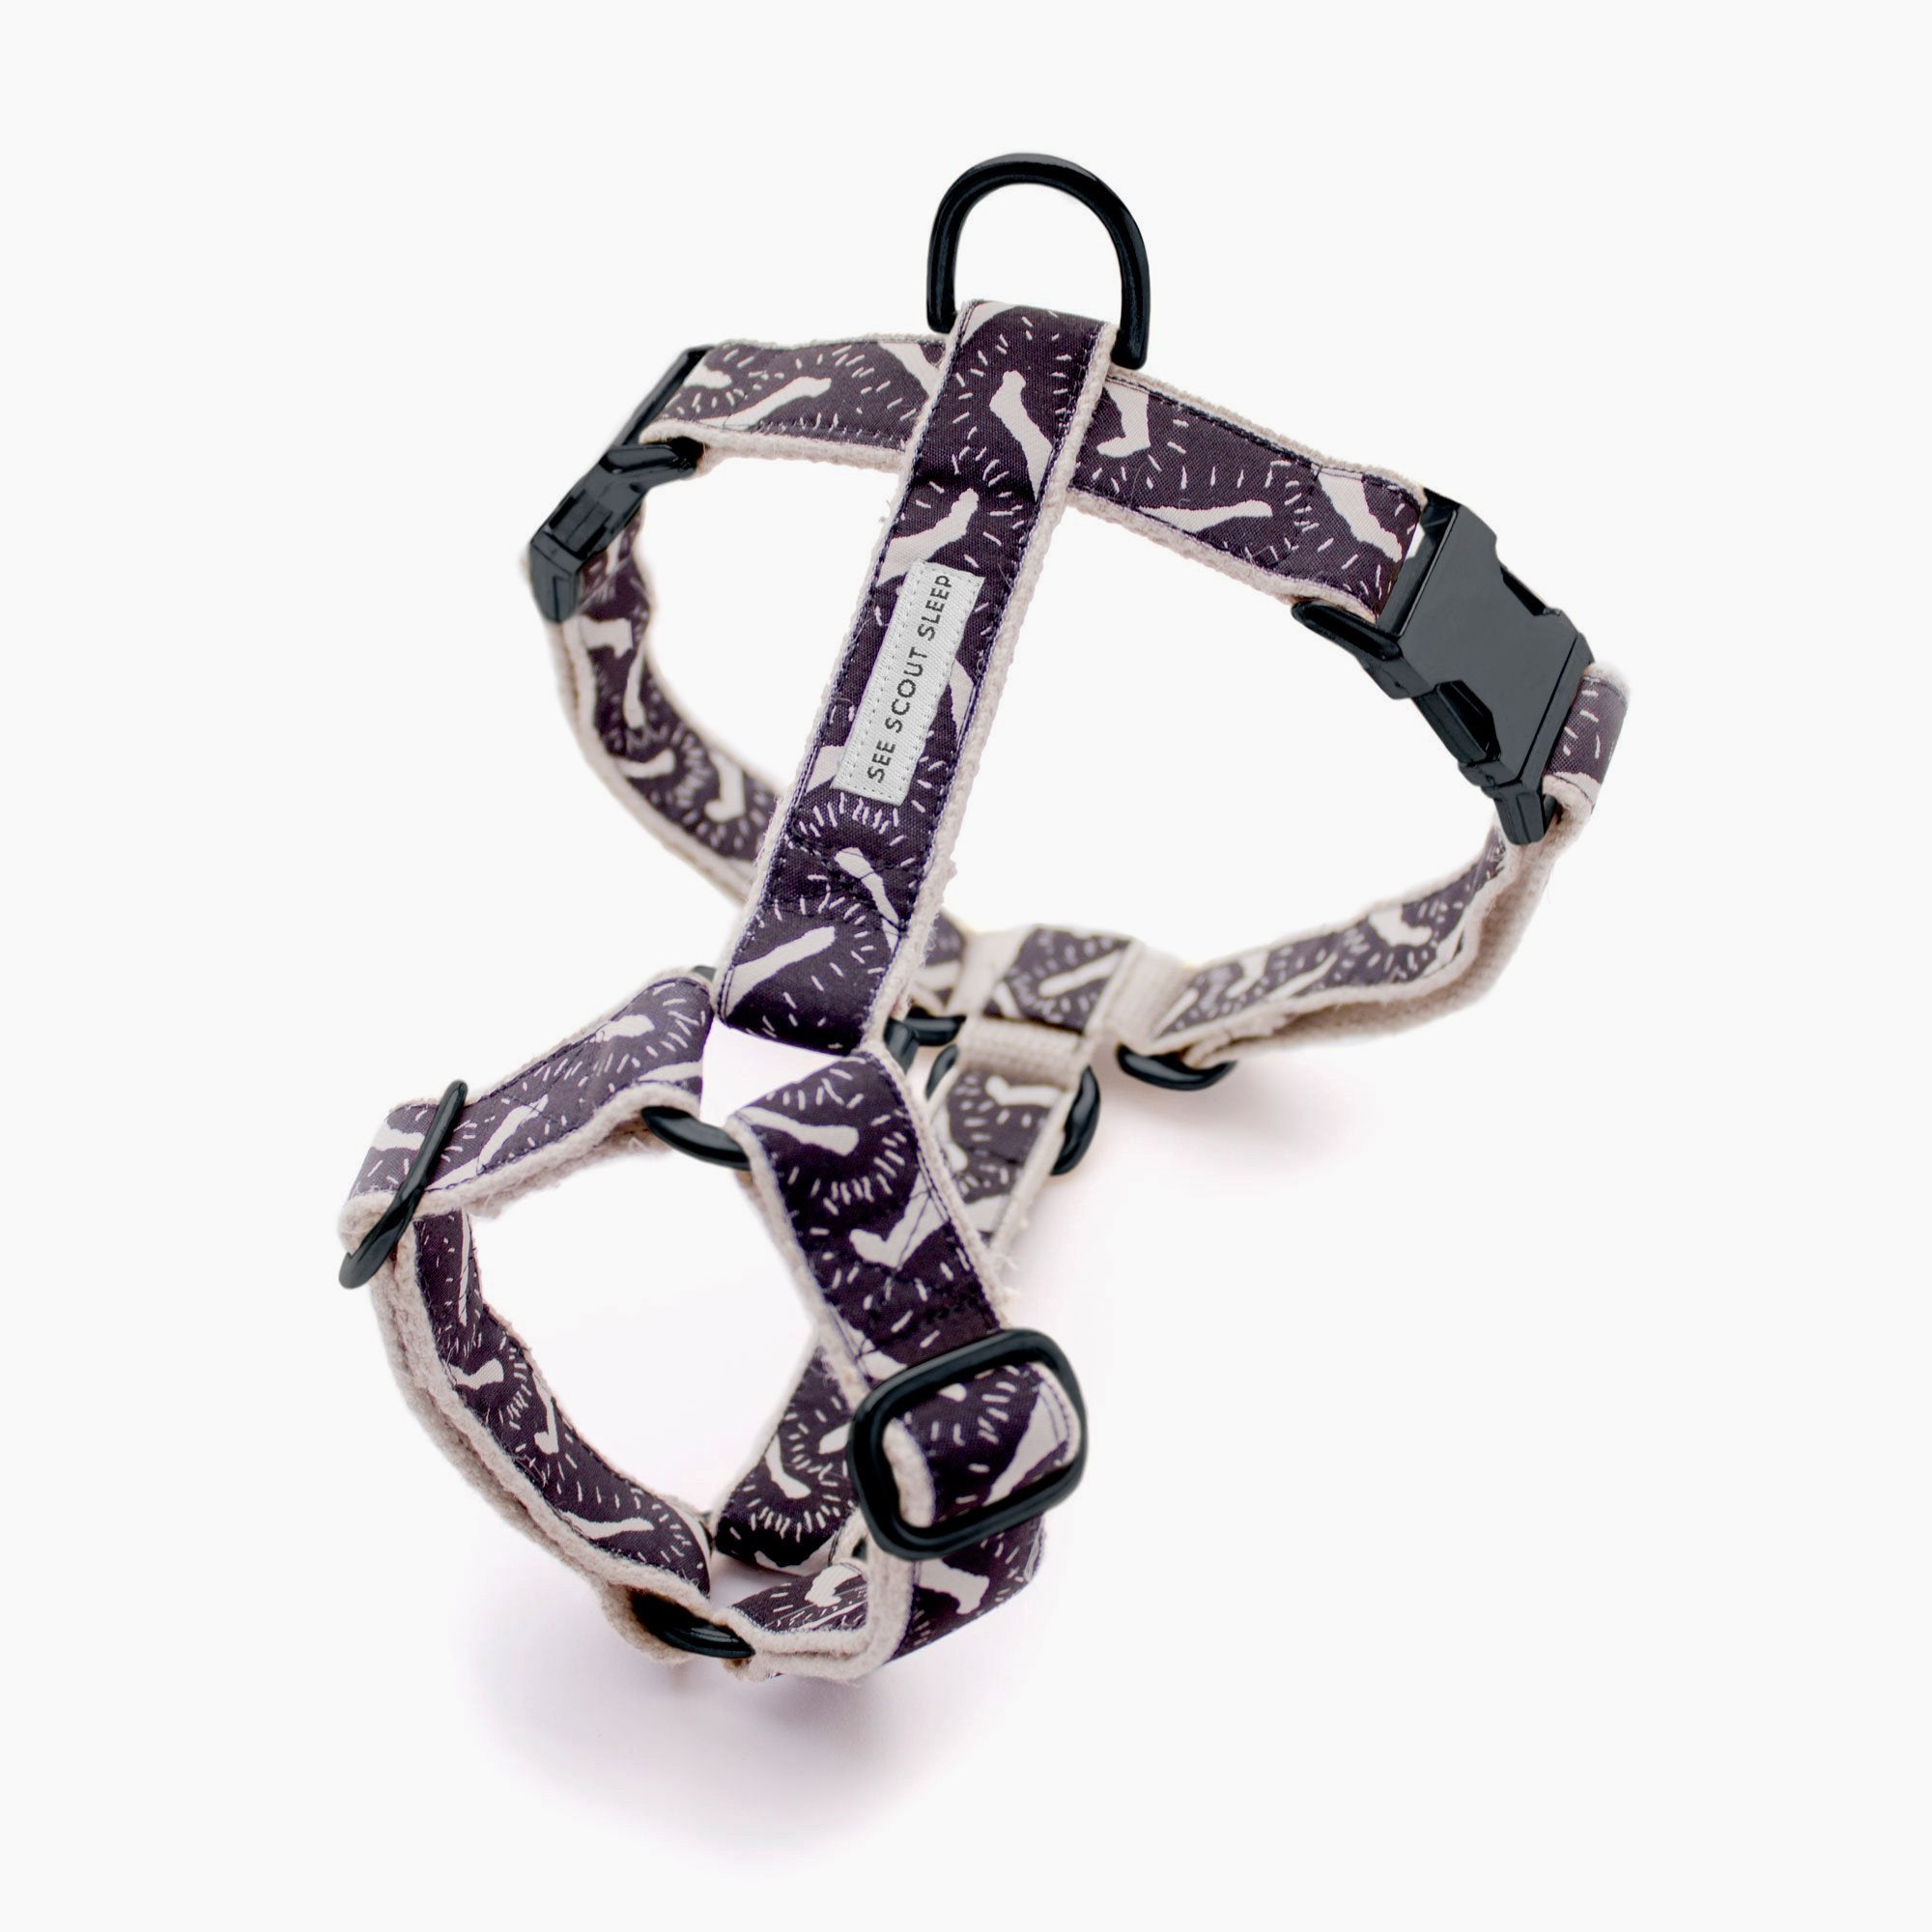 Life of the Party Dog Harness - Black & Cream - NEW PETS ON THE BLOCK.COM